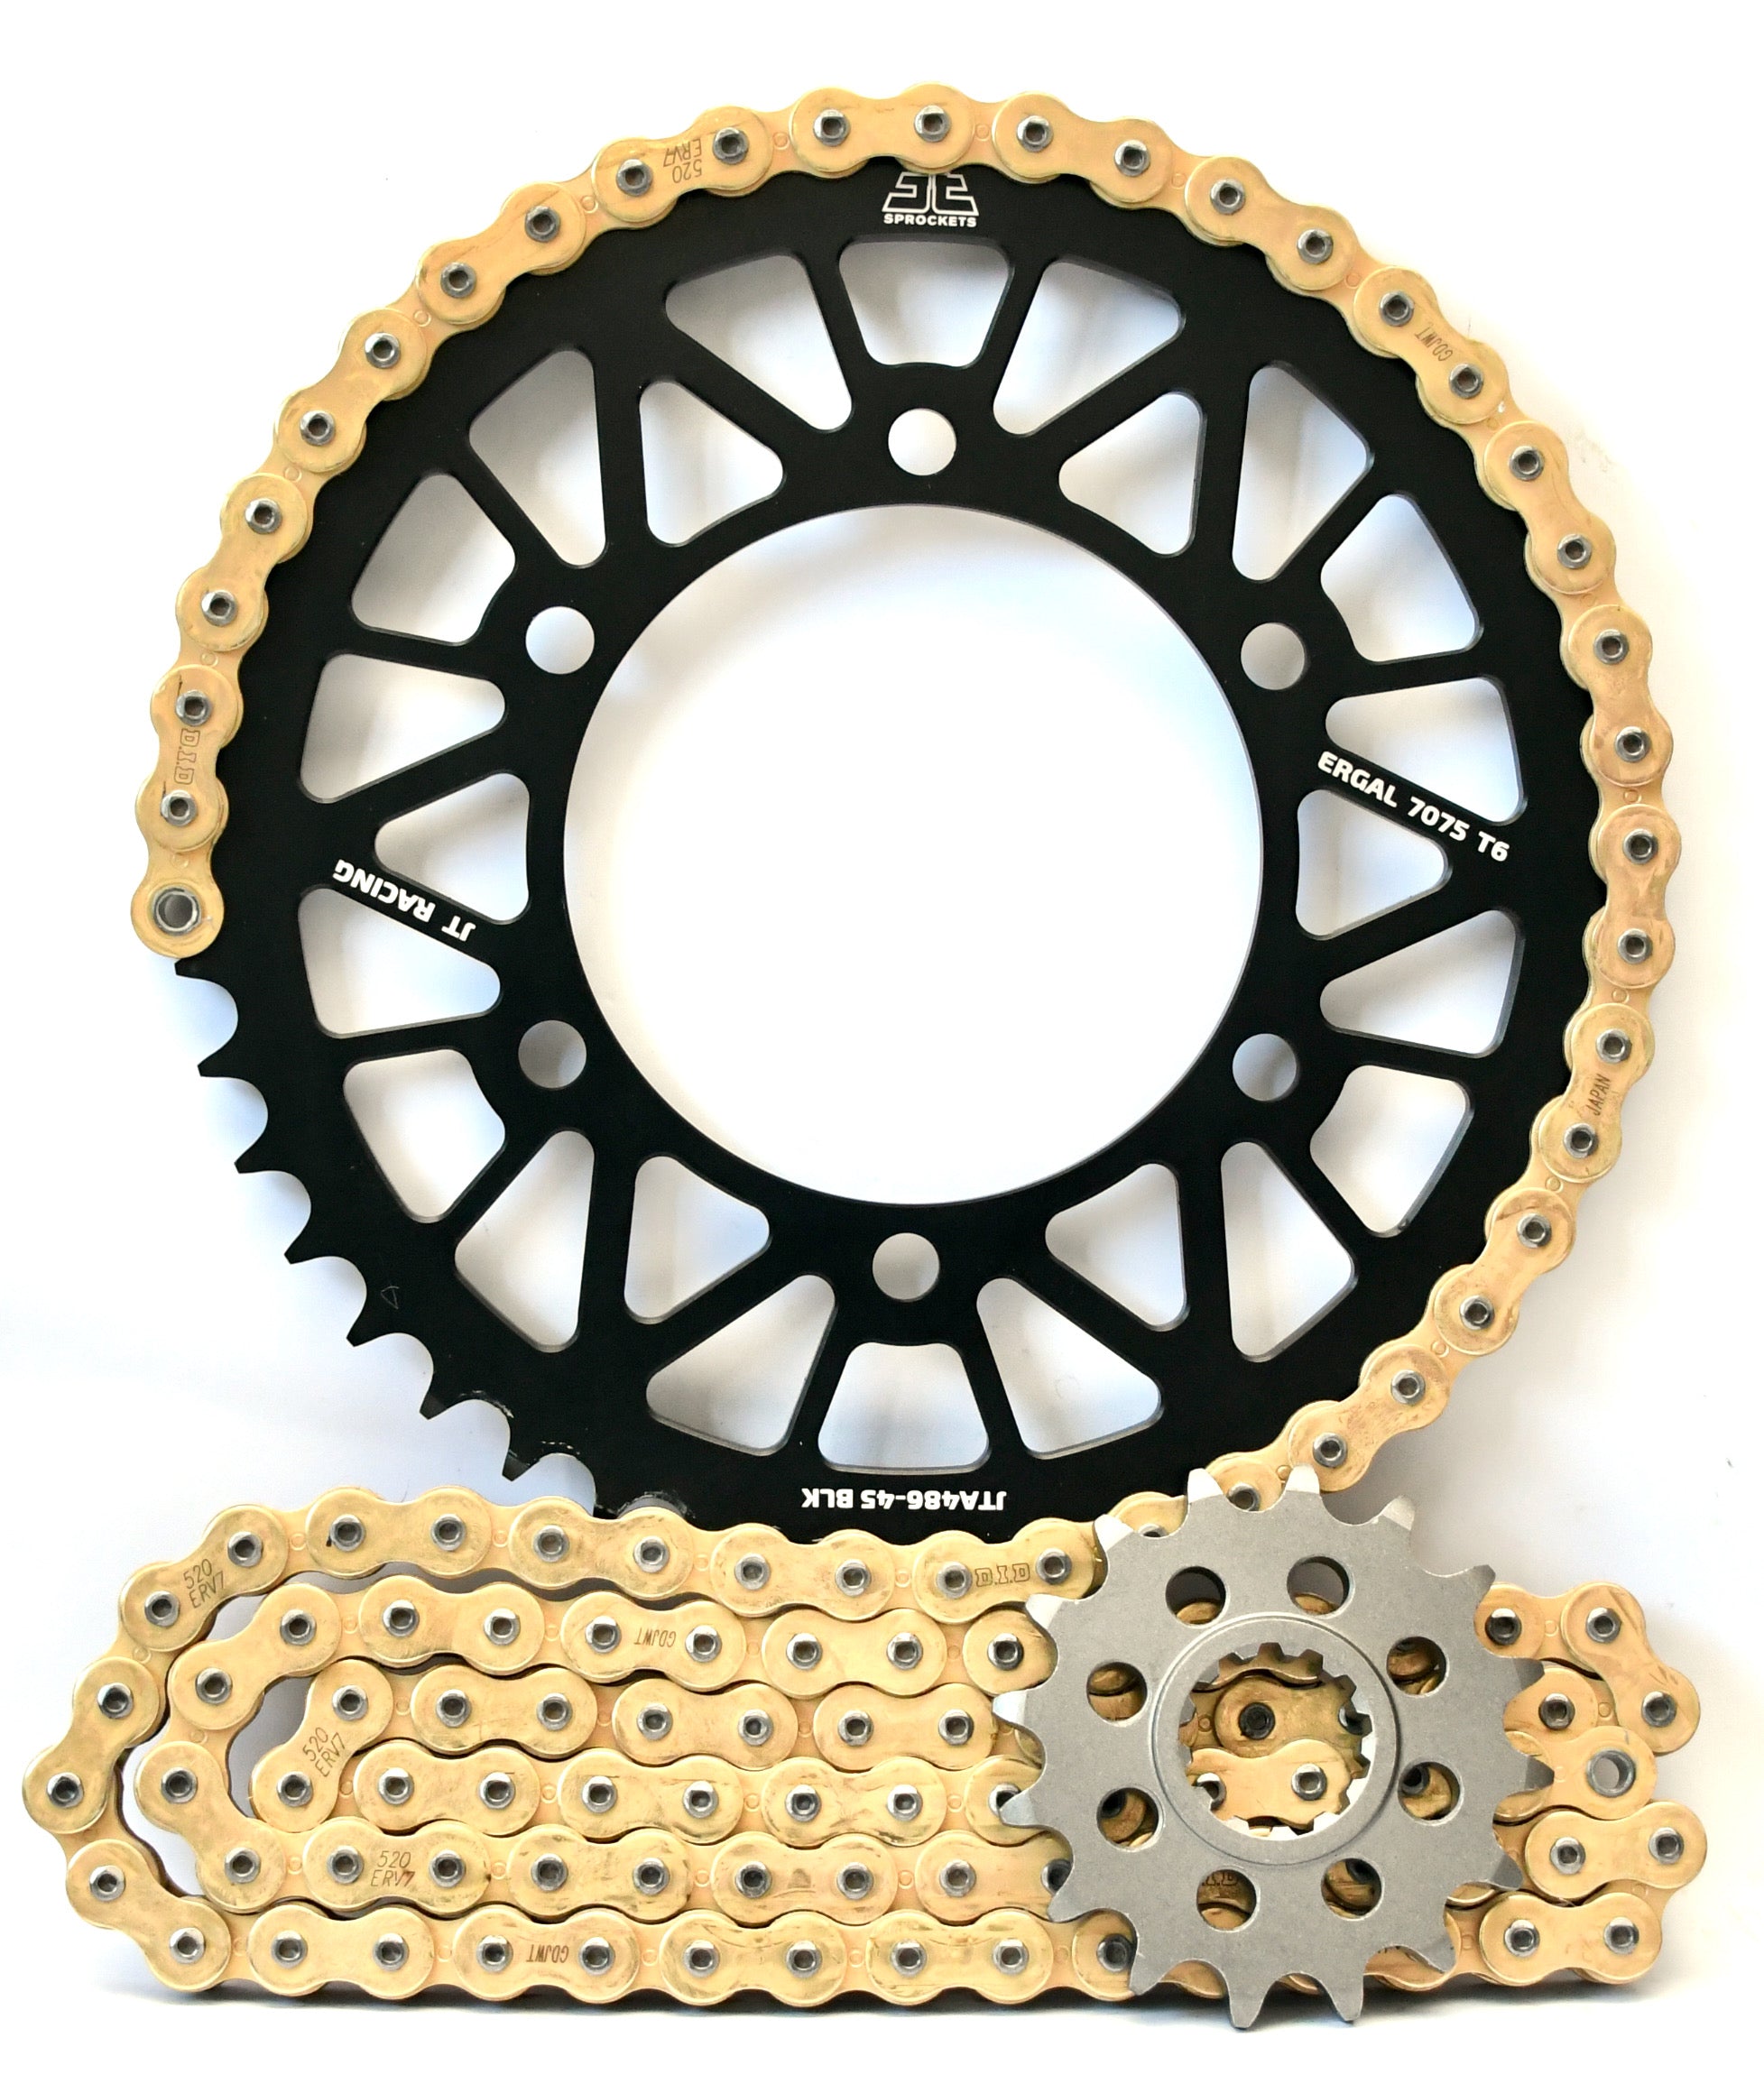 JT Racelite and DID 520 Conversion Chain & Sprocket Kit for Suzuki GSX-R1000 2017> - Choose Your Gearing